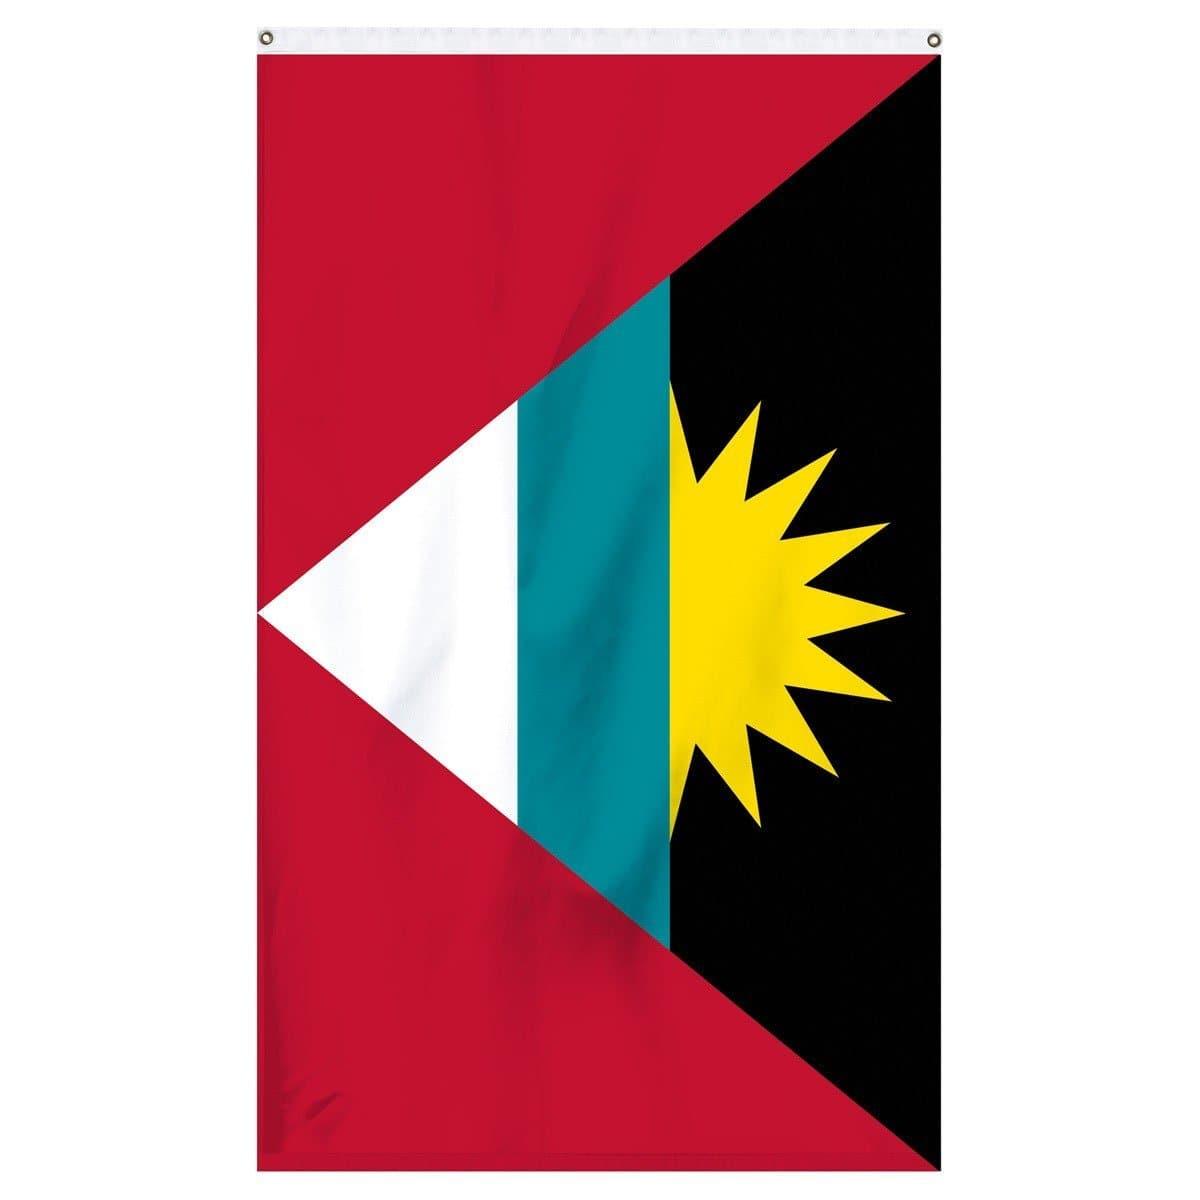 Antigua and Barbuda International flag for sale to fly on a flagpole or parade